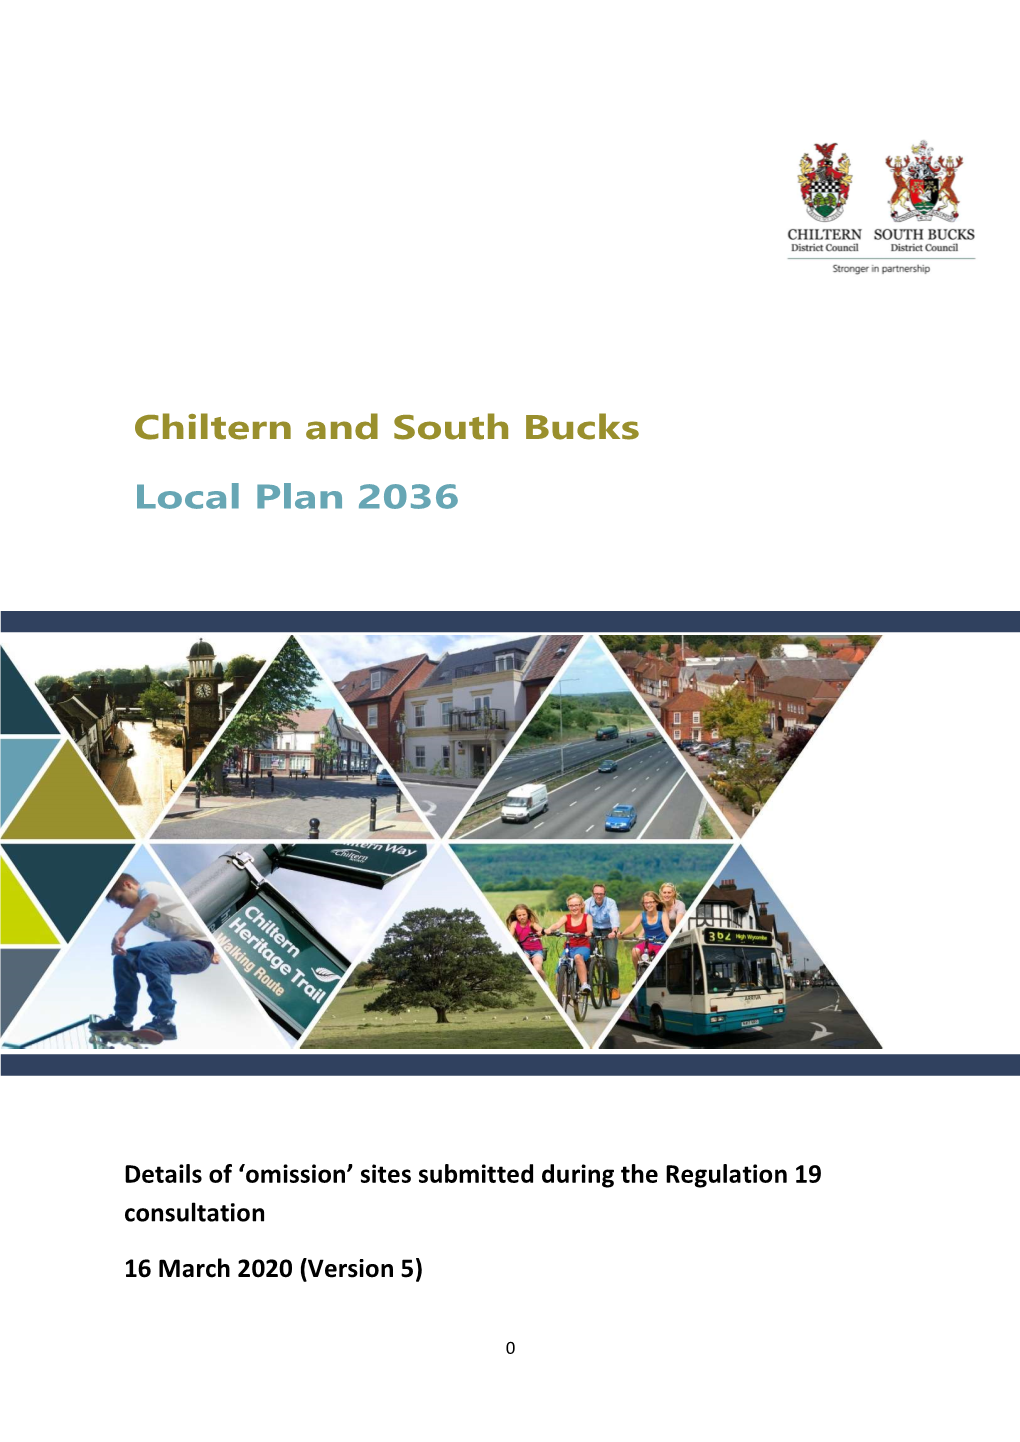 Chiltern and South Bucks Local Plan 2036